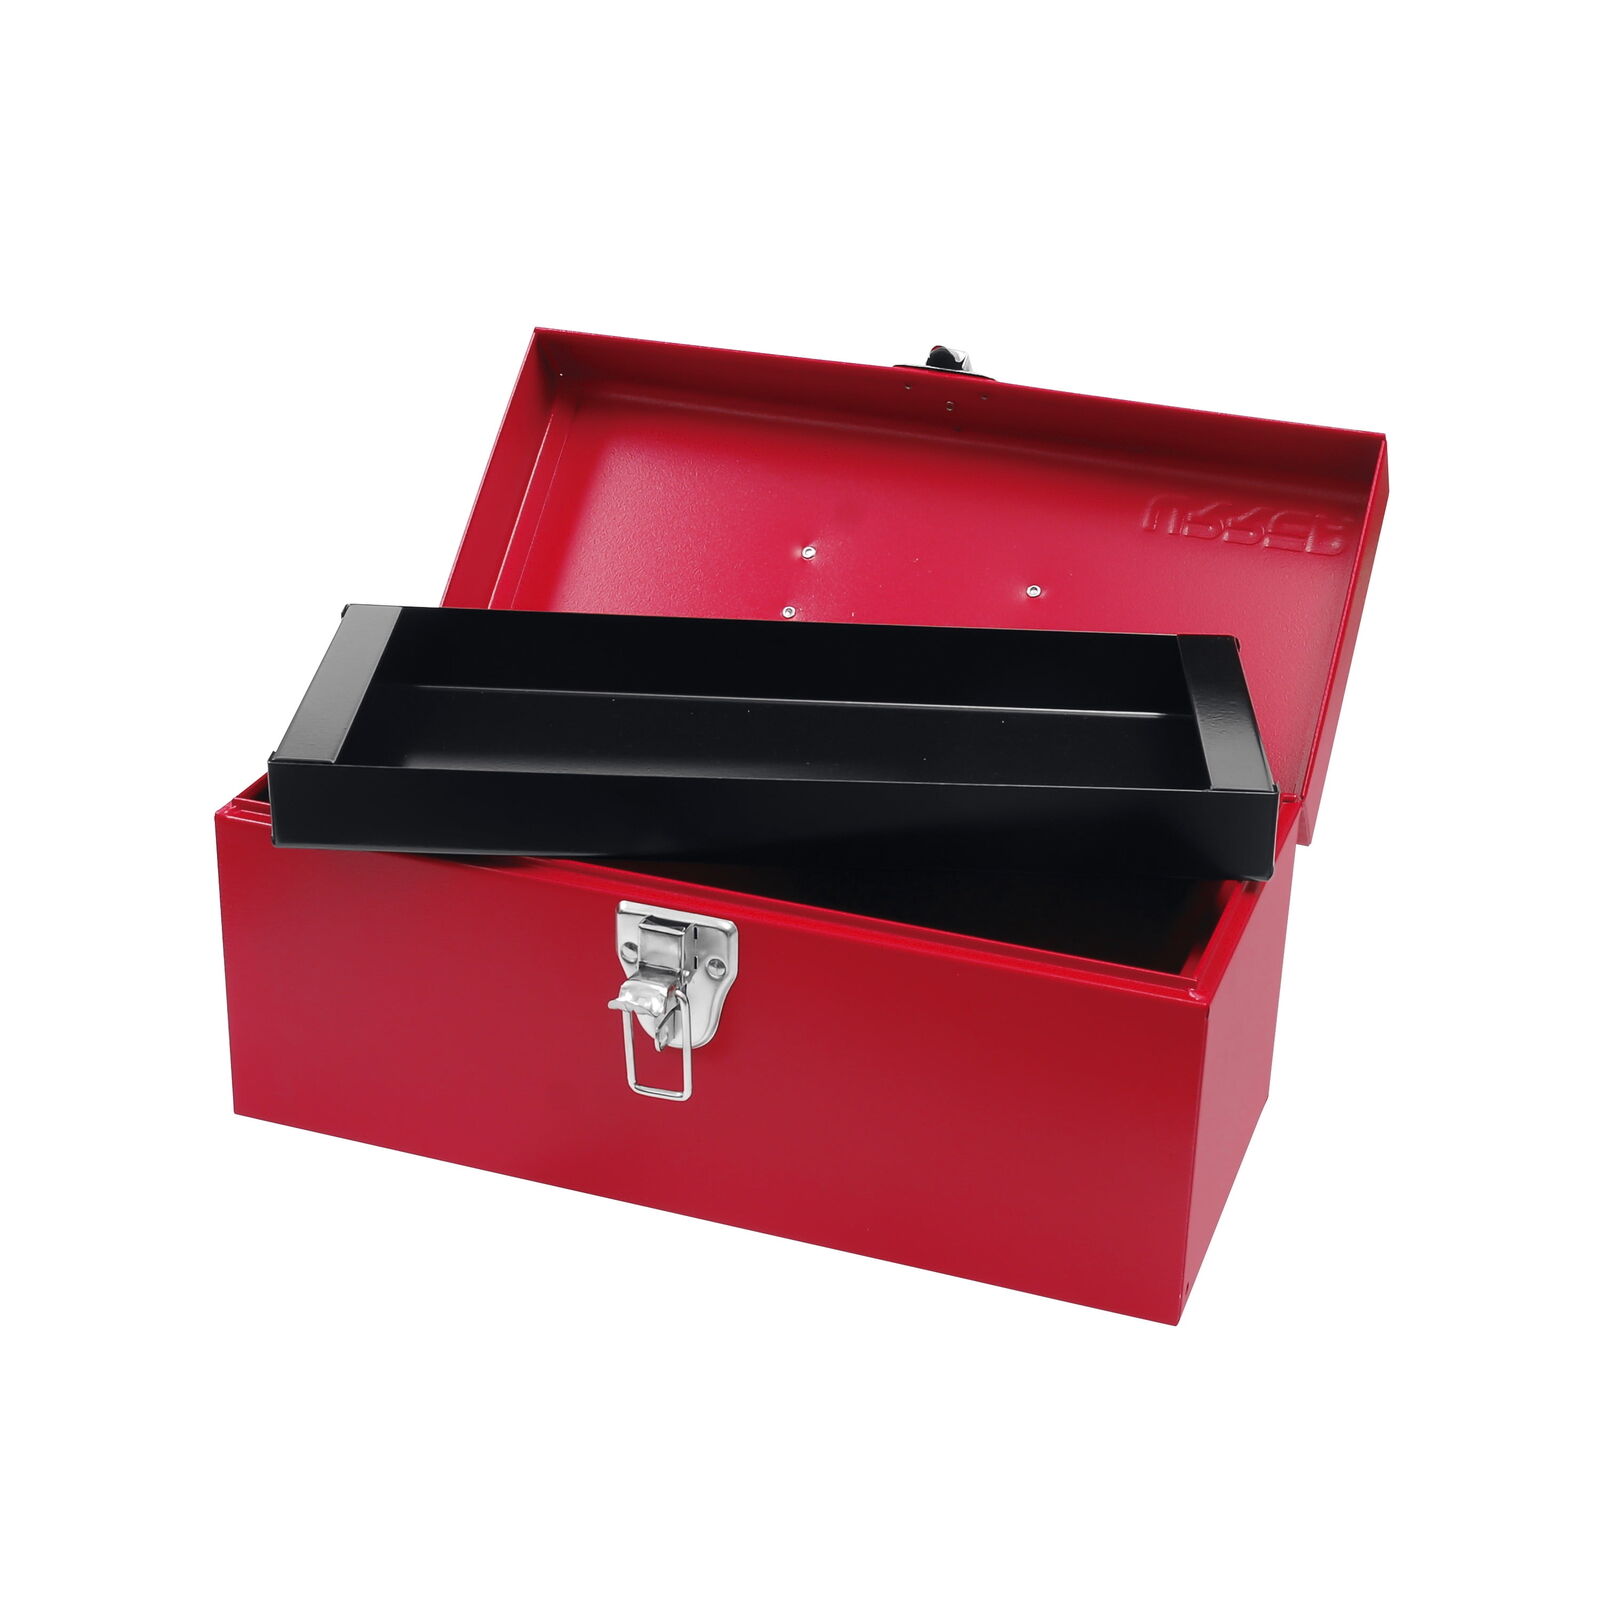 Industrial 14 In Metal Tool Box With Plastic Handle And Metallic Tray